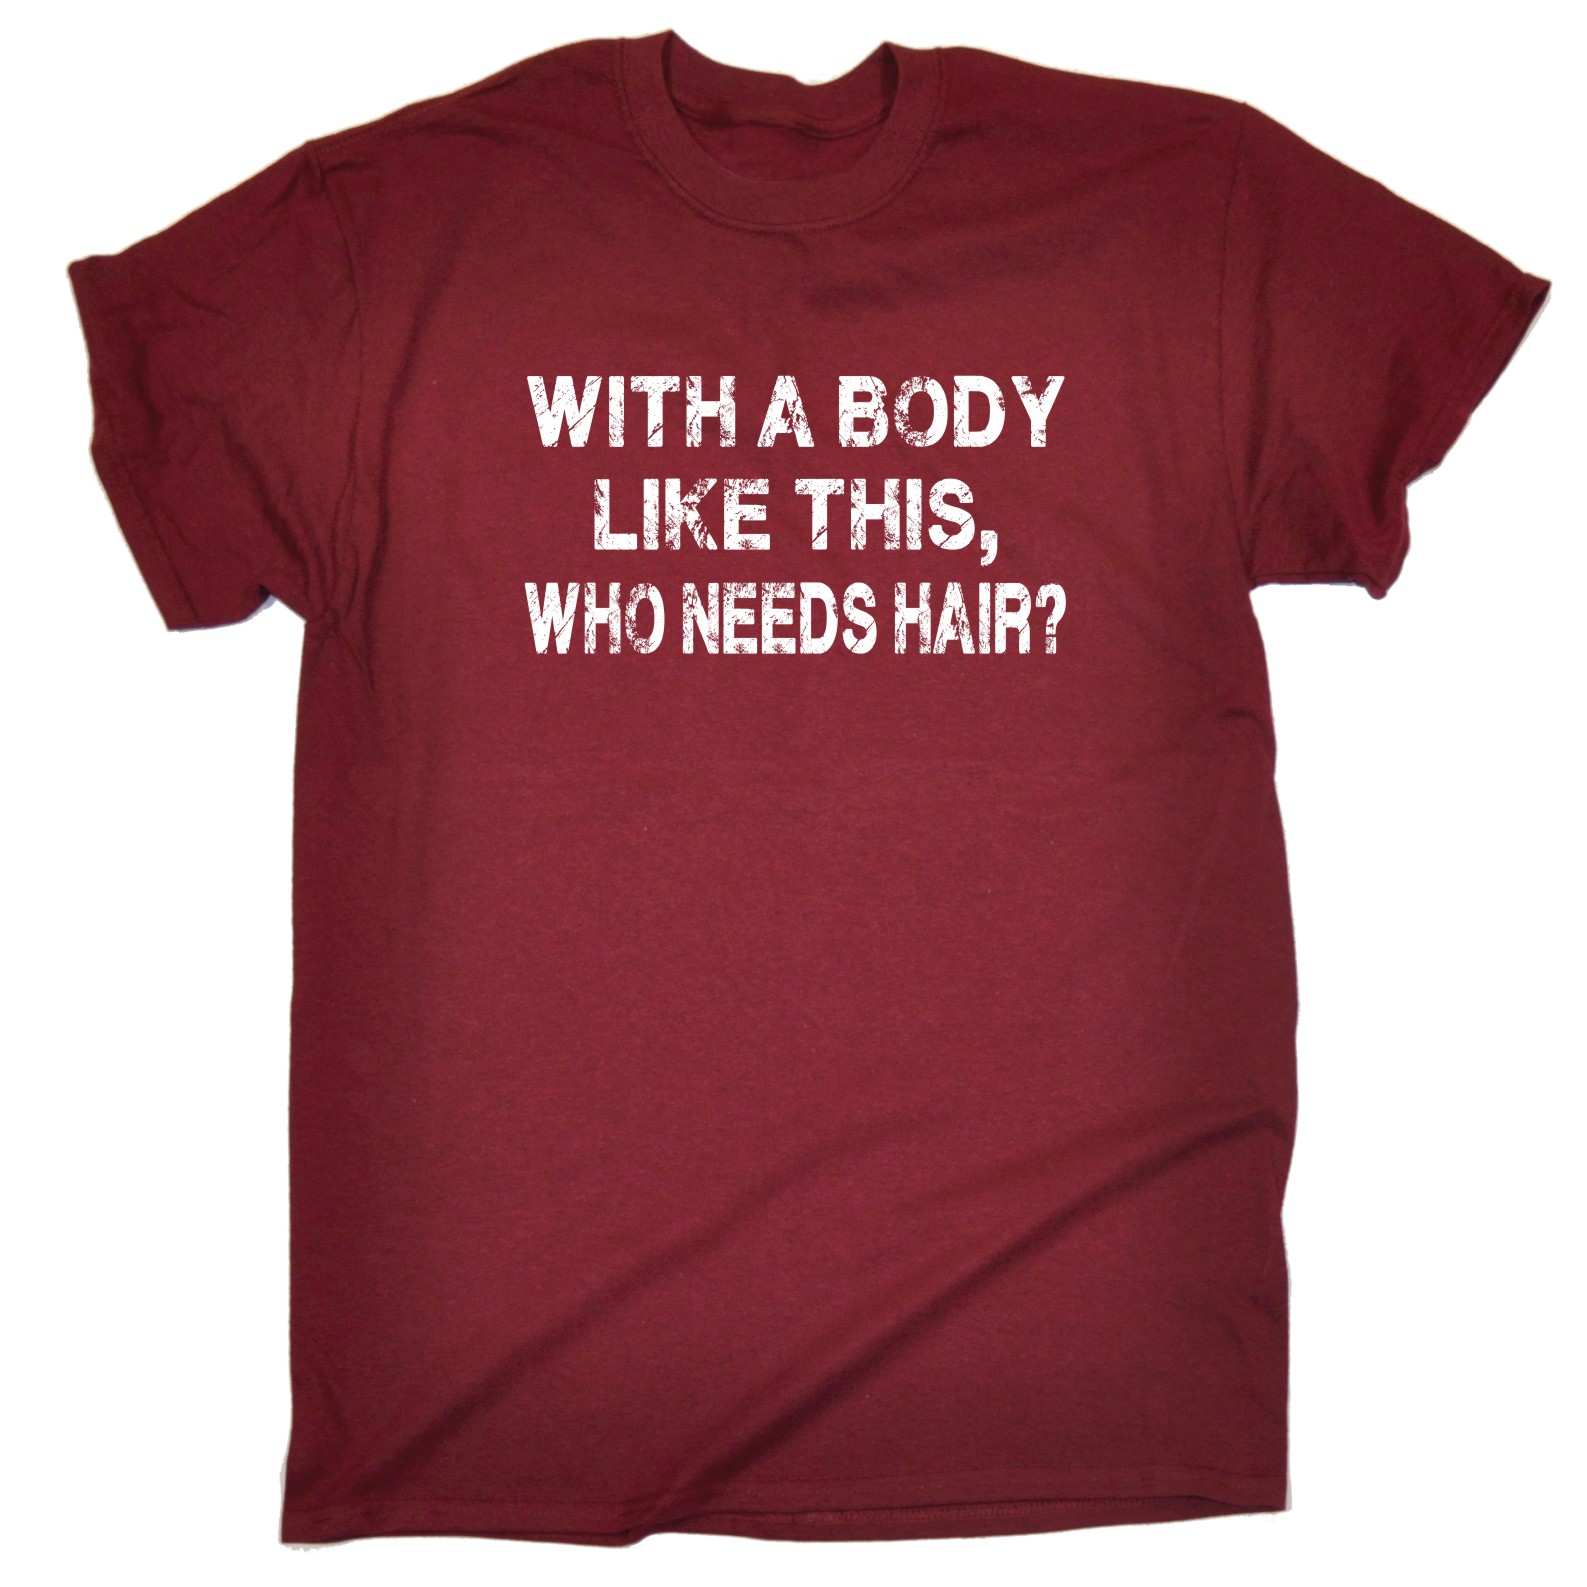 thumbnail 5 - Men&#039;s With A Body Like This Who Needs Hair Funny Joke Humour T-SHIRT Birthday